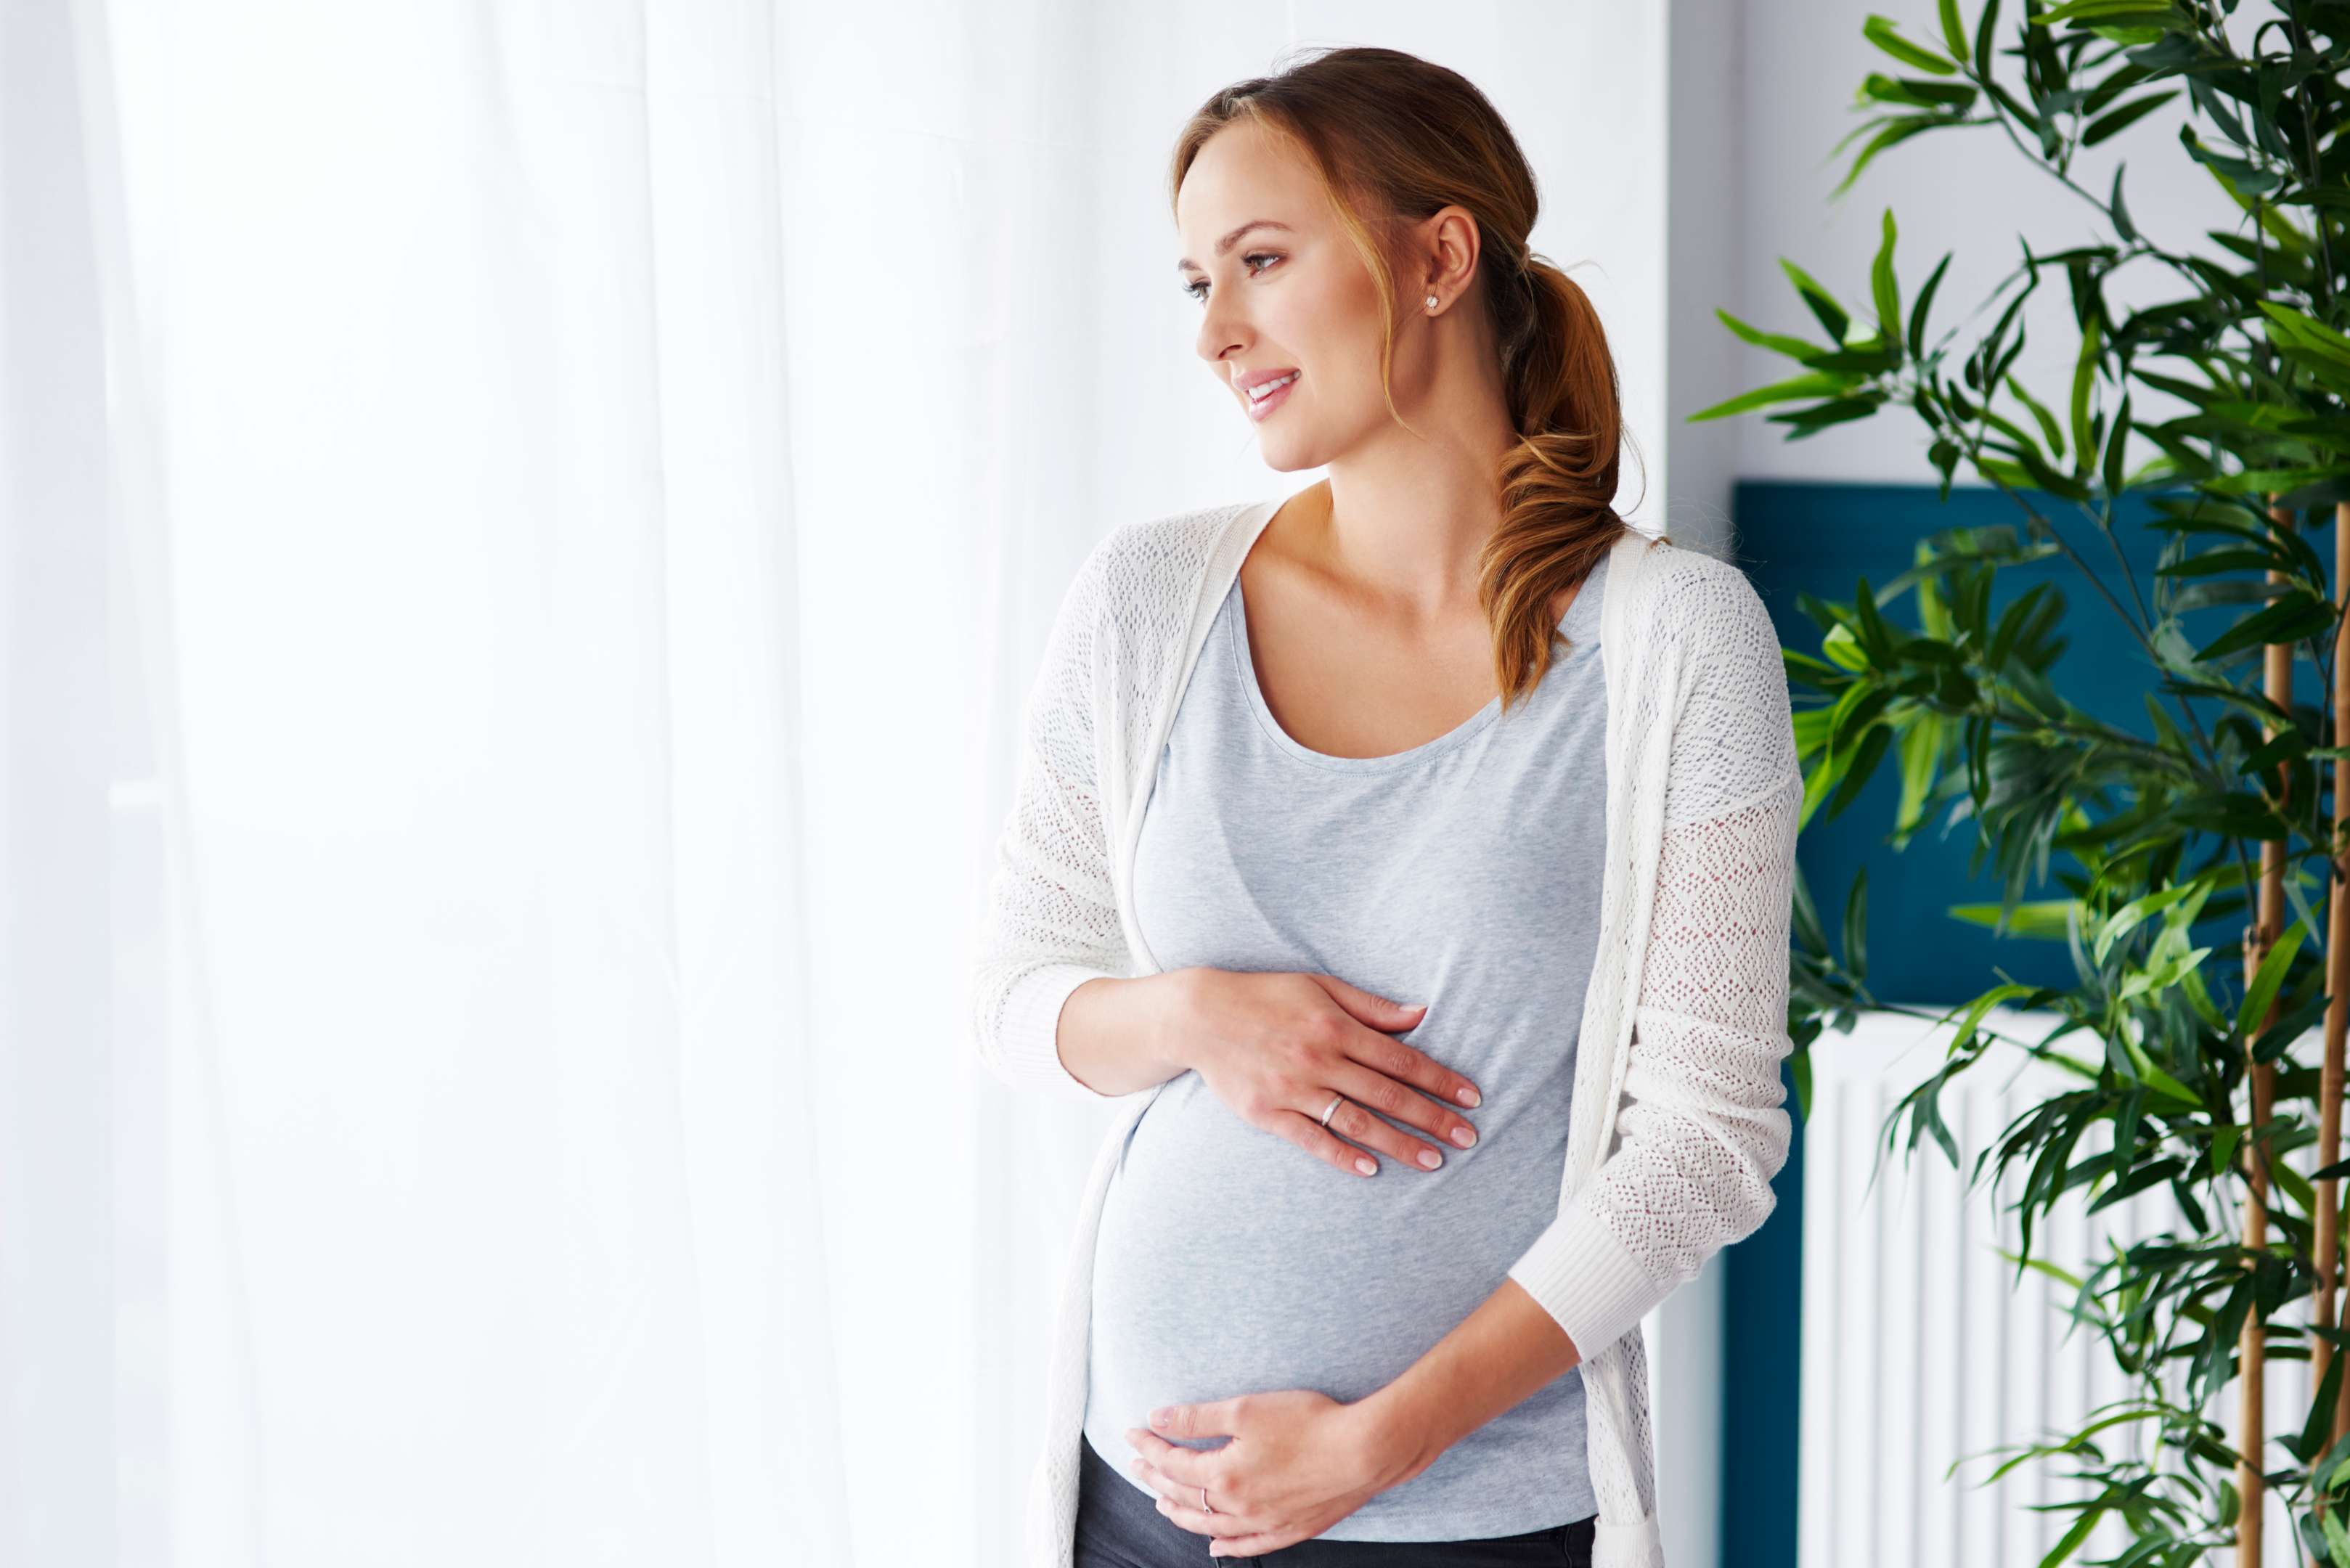 The much-wanted pregnancy will stop the menstrual cycle as long as you are pregnant.